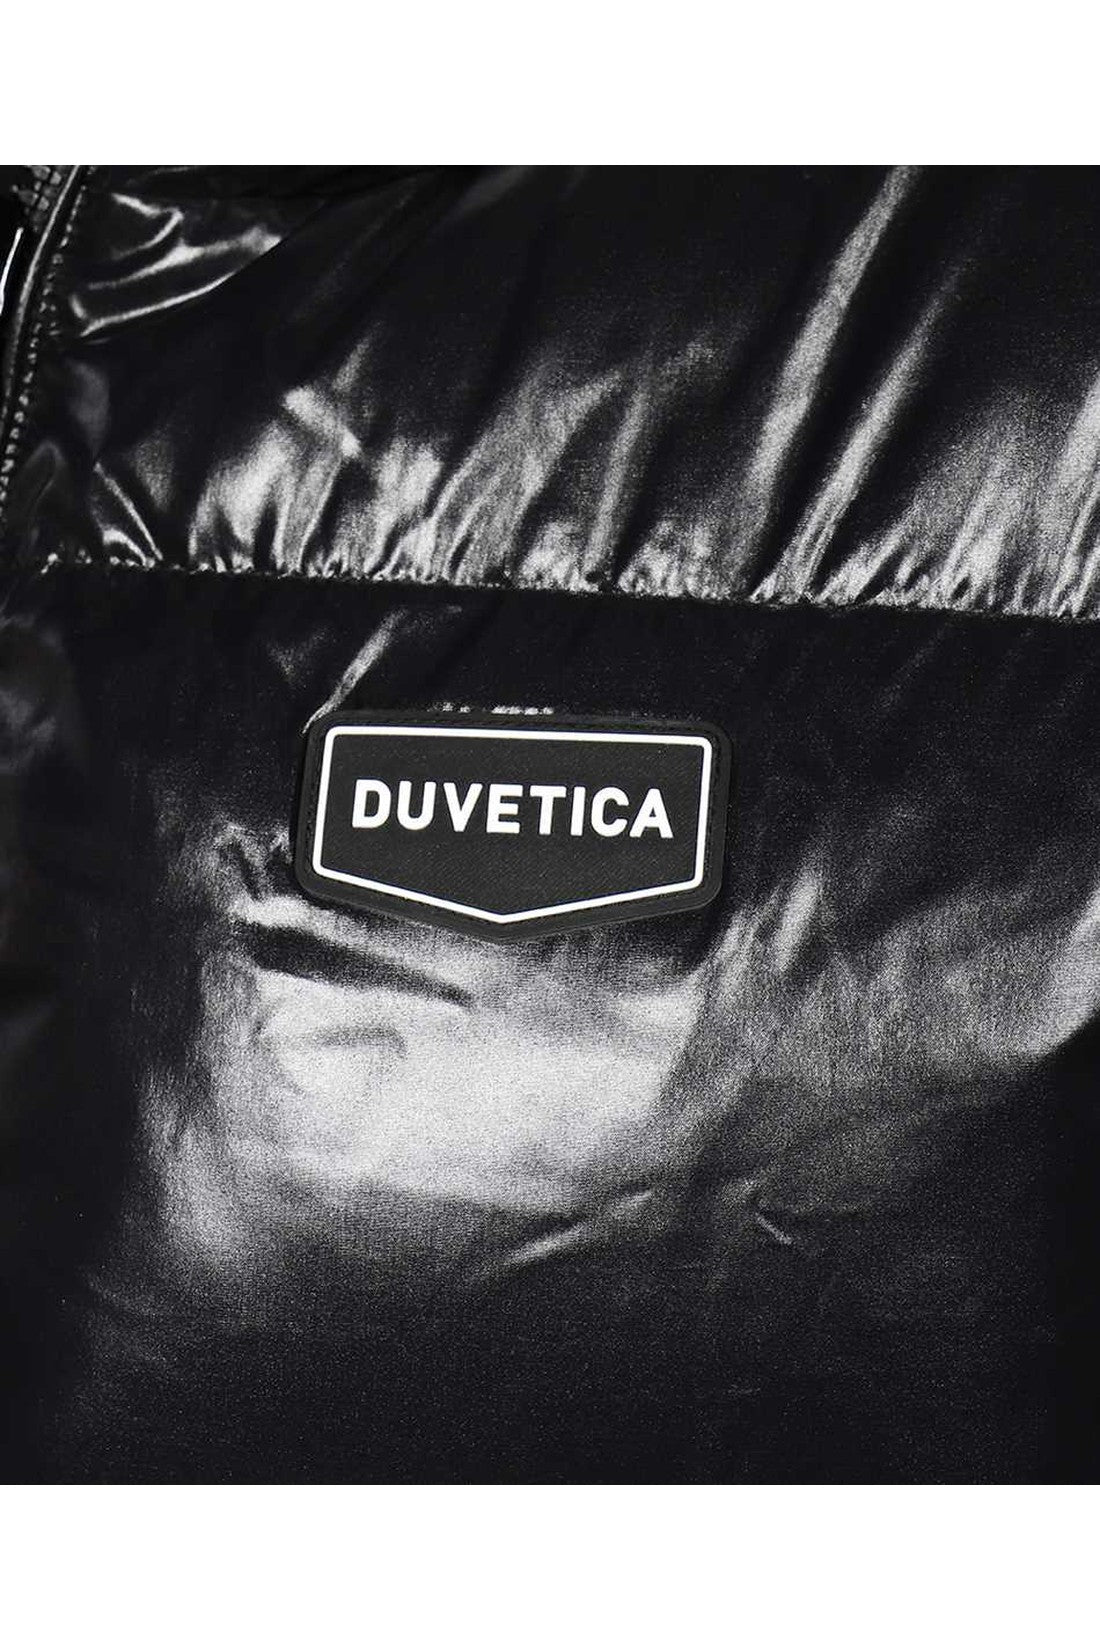 Duvetica-OUTLET-SALE-Long-hooded-down-jacket-Jacken-Mantel-50-ARCHIVE-COLLECTION-3.jpg